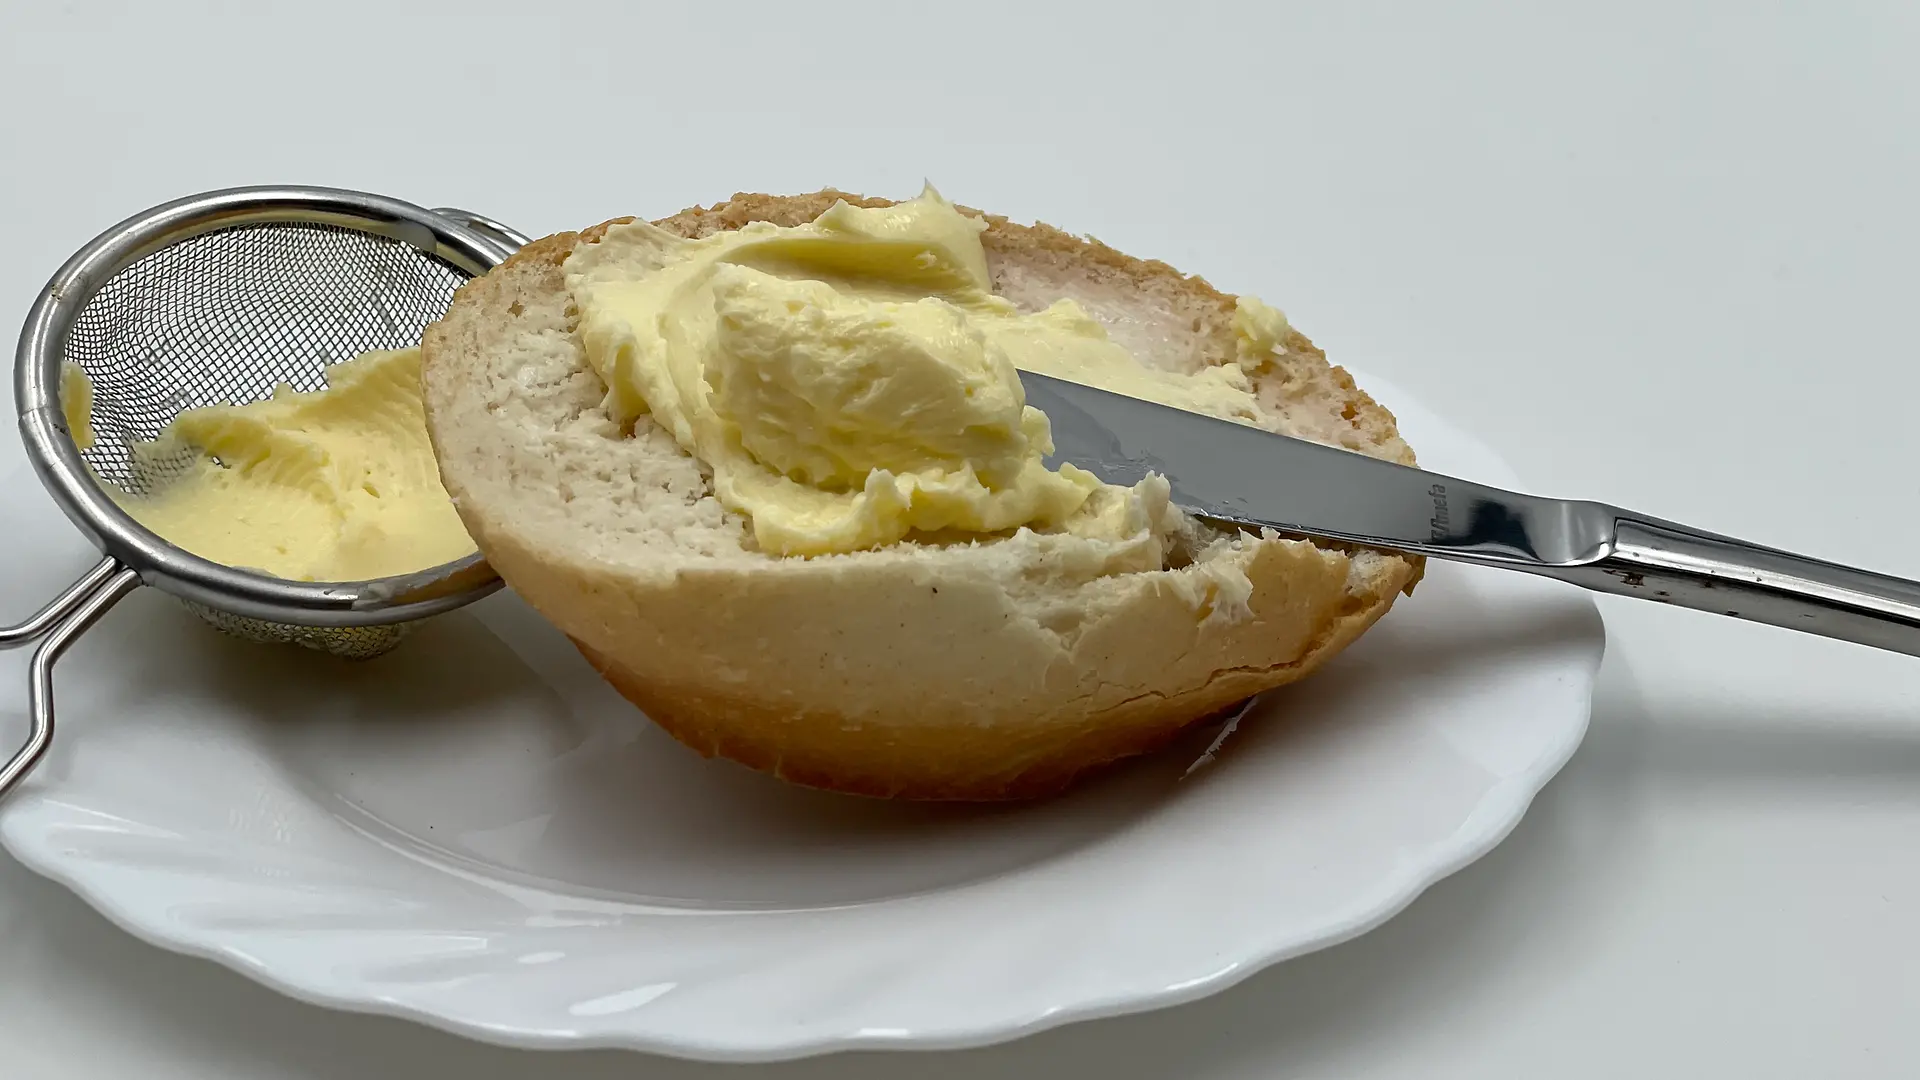 Buttered bun with knife on a plate next to a sieve with butter